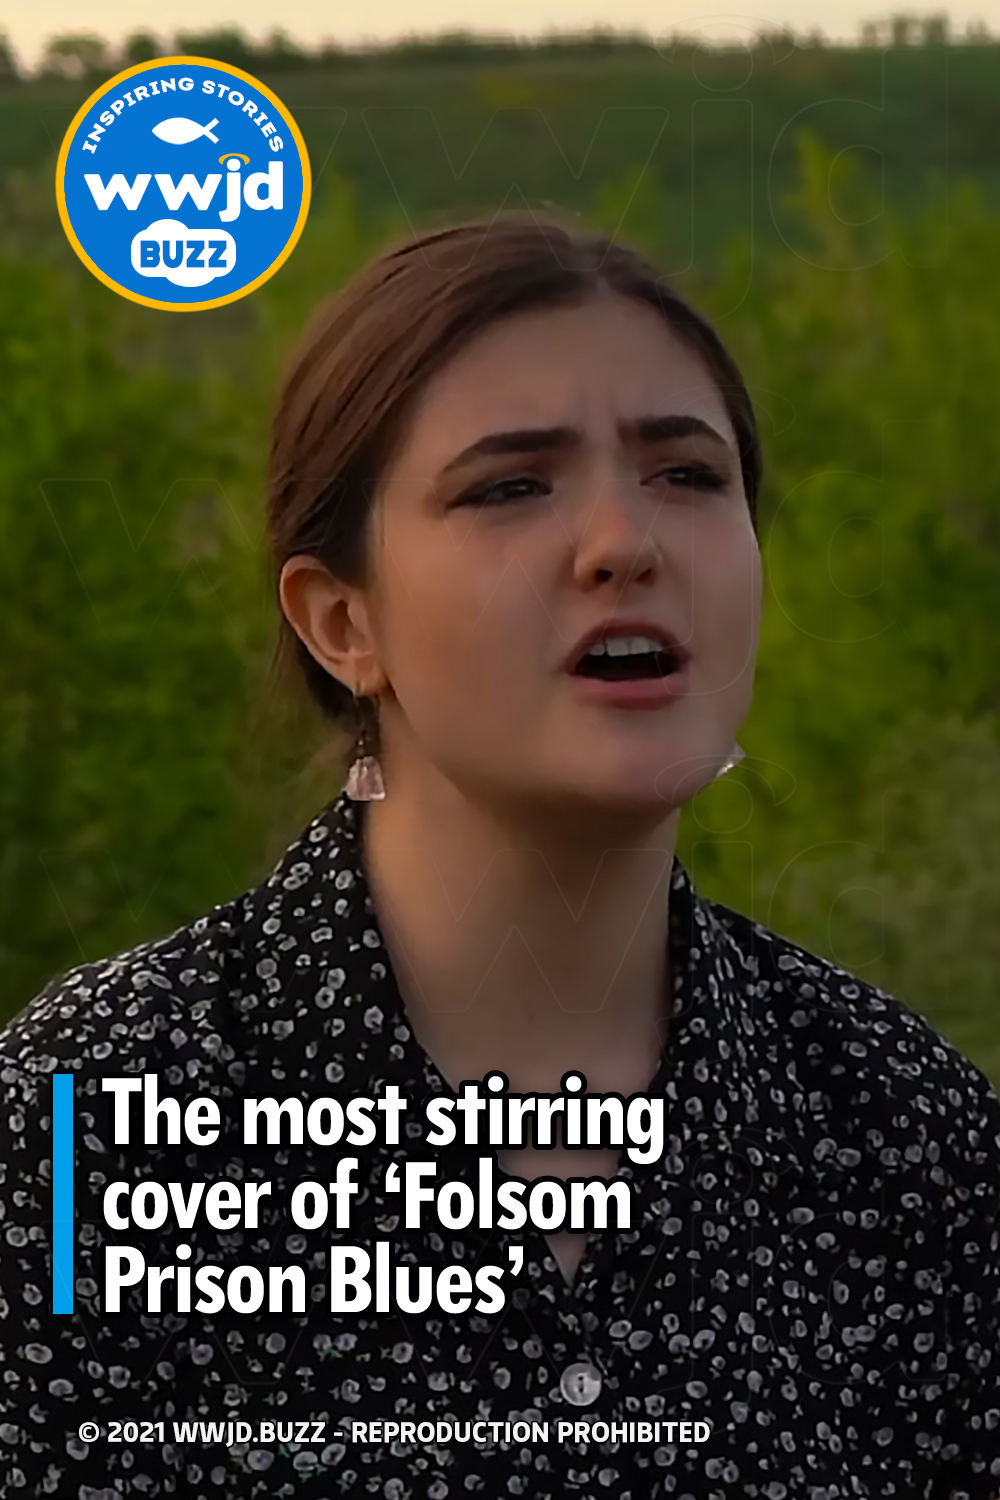 The most stirring cover of ‘Folsom Prison Blues’